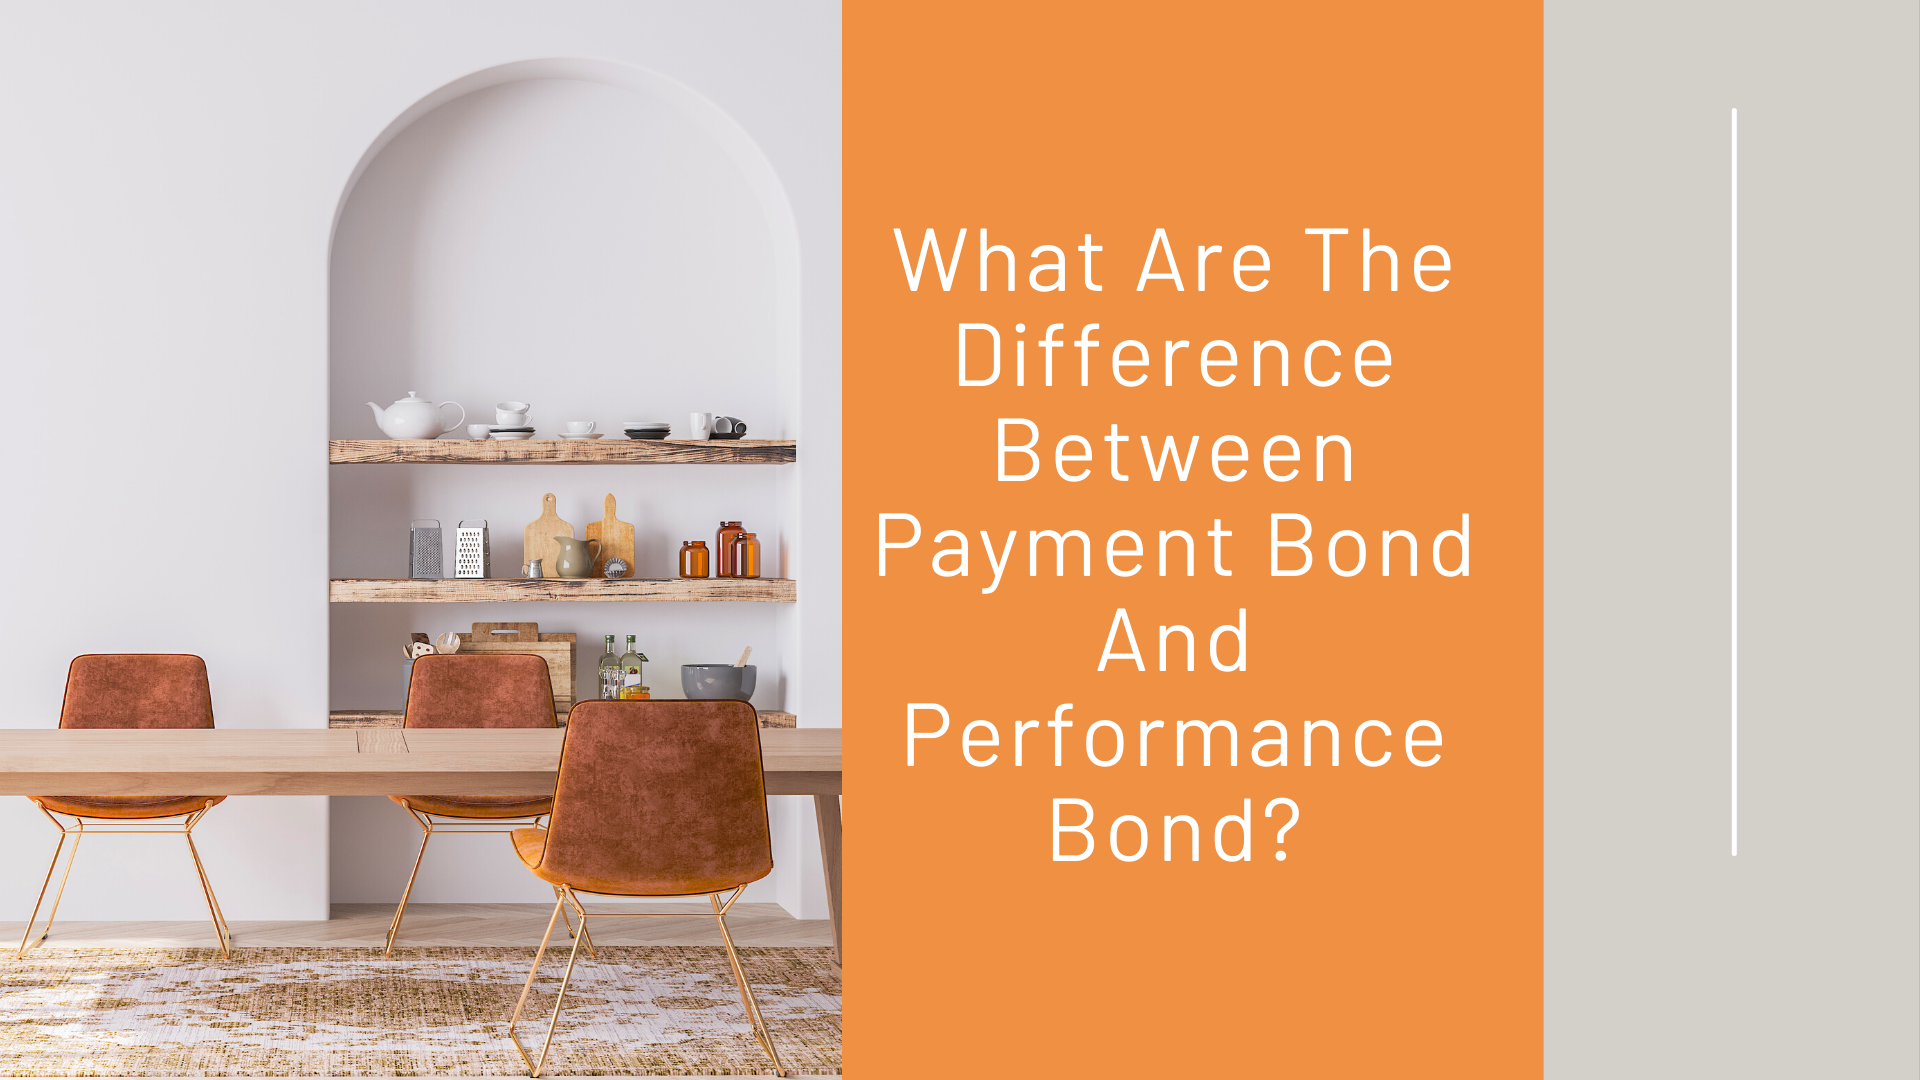 payment bond - What is the difference between a payment bond and a performance bond? - orange interior